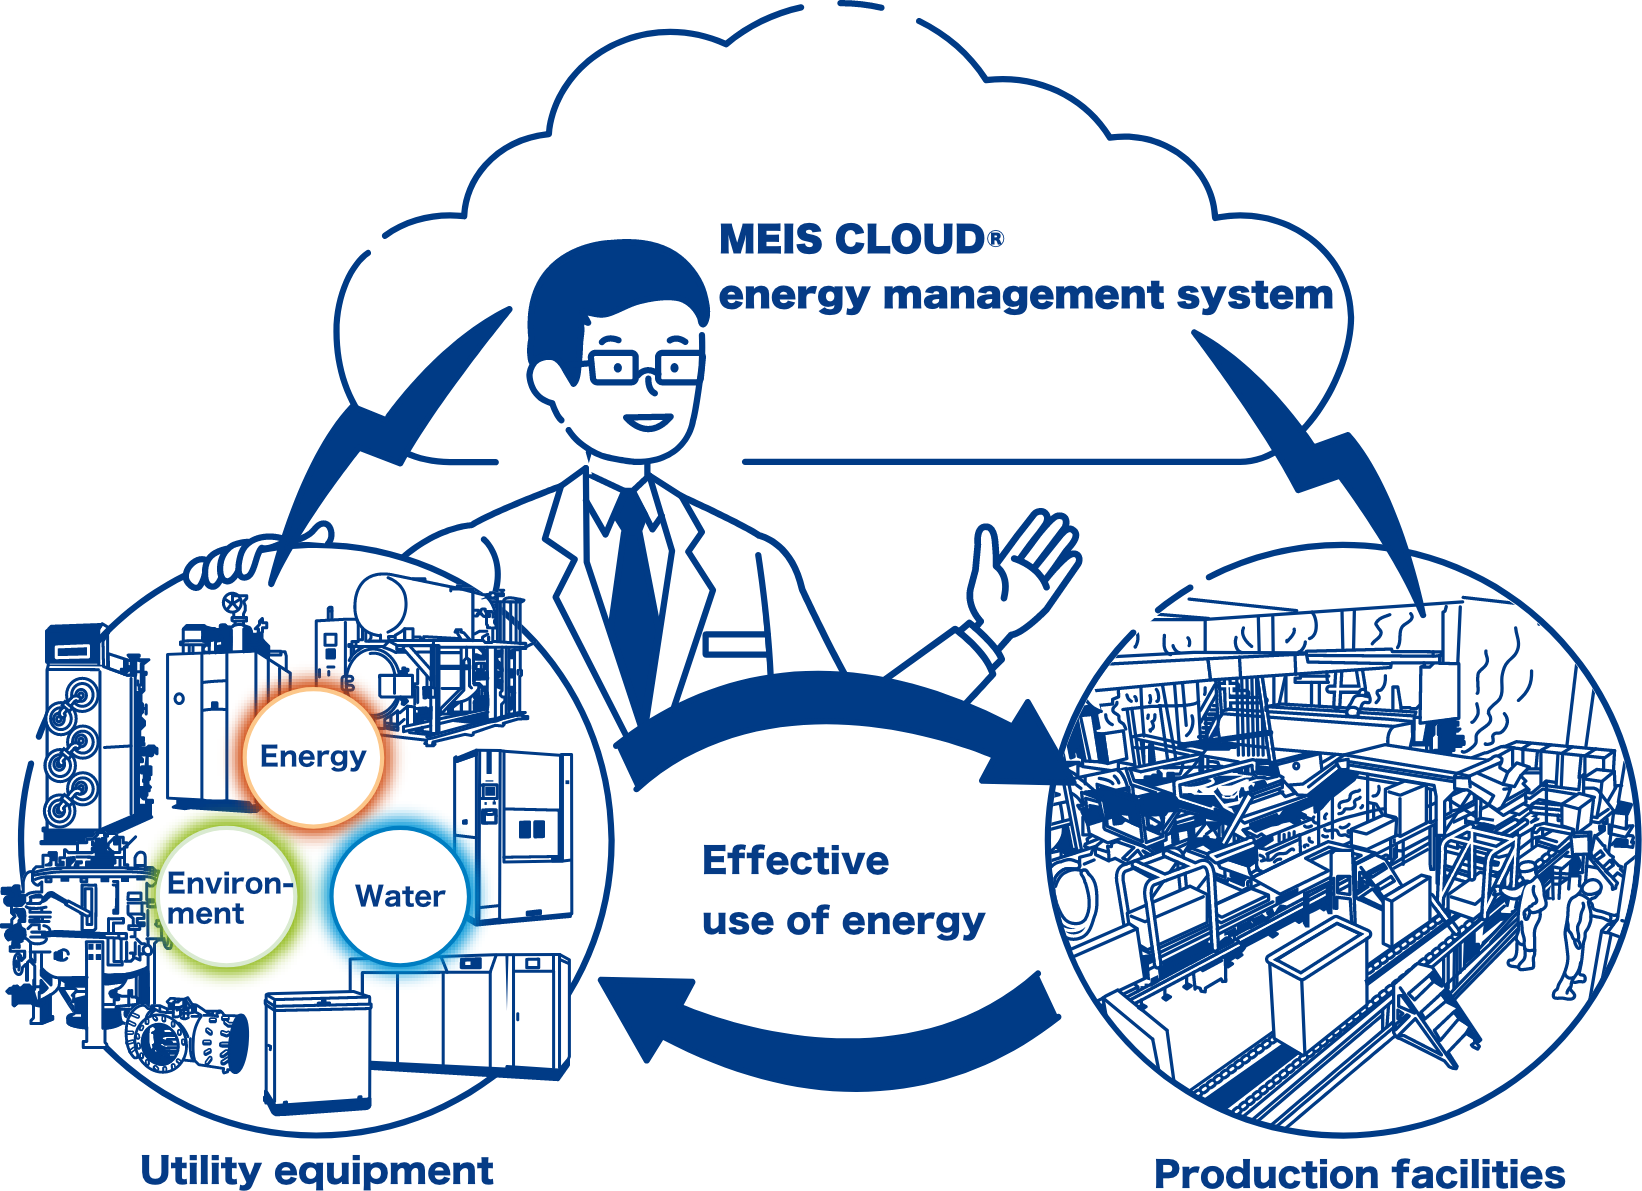 Energy management Cooperation between utility equipment and production equipment using MEIS CLOUD® and effective use of energy